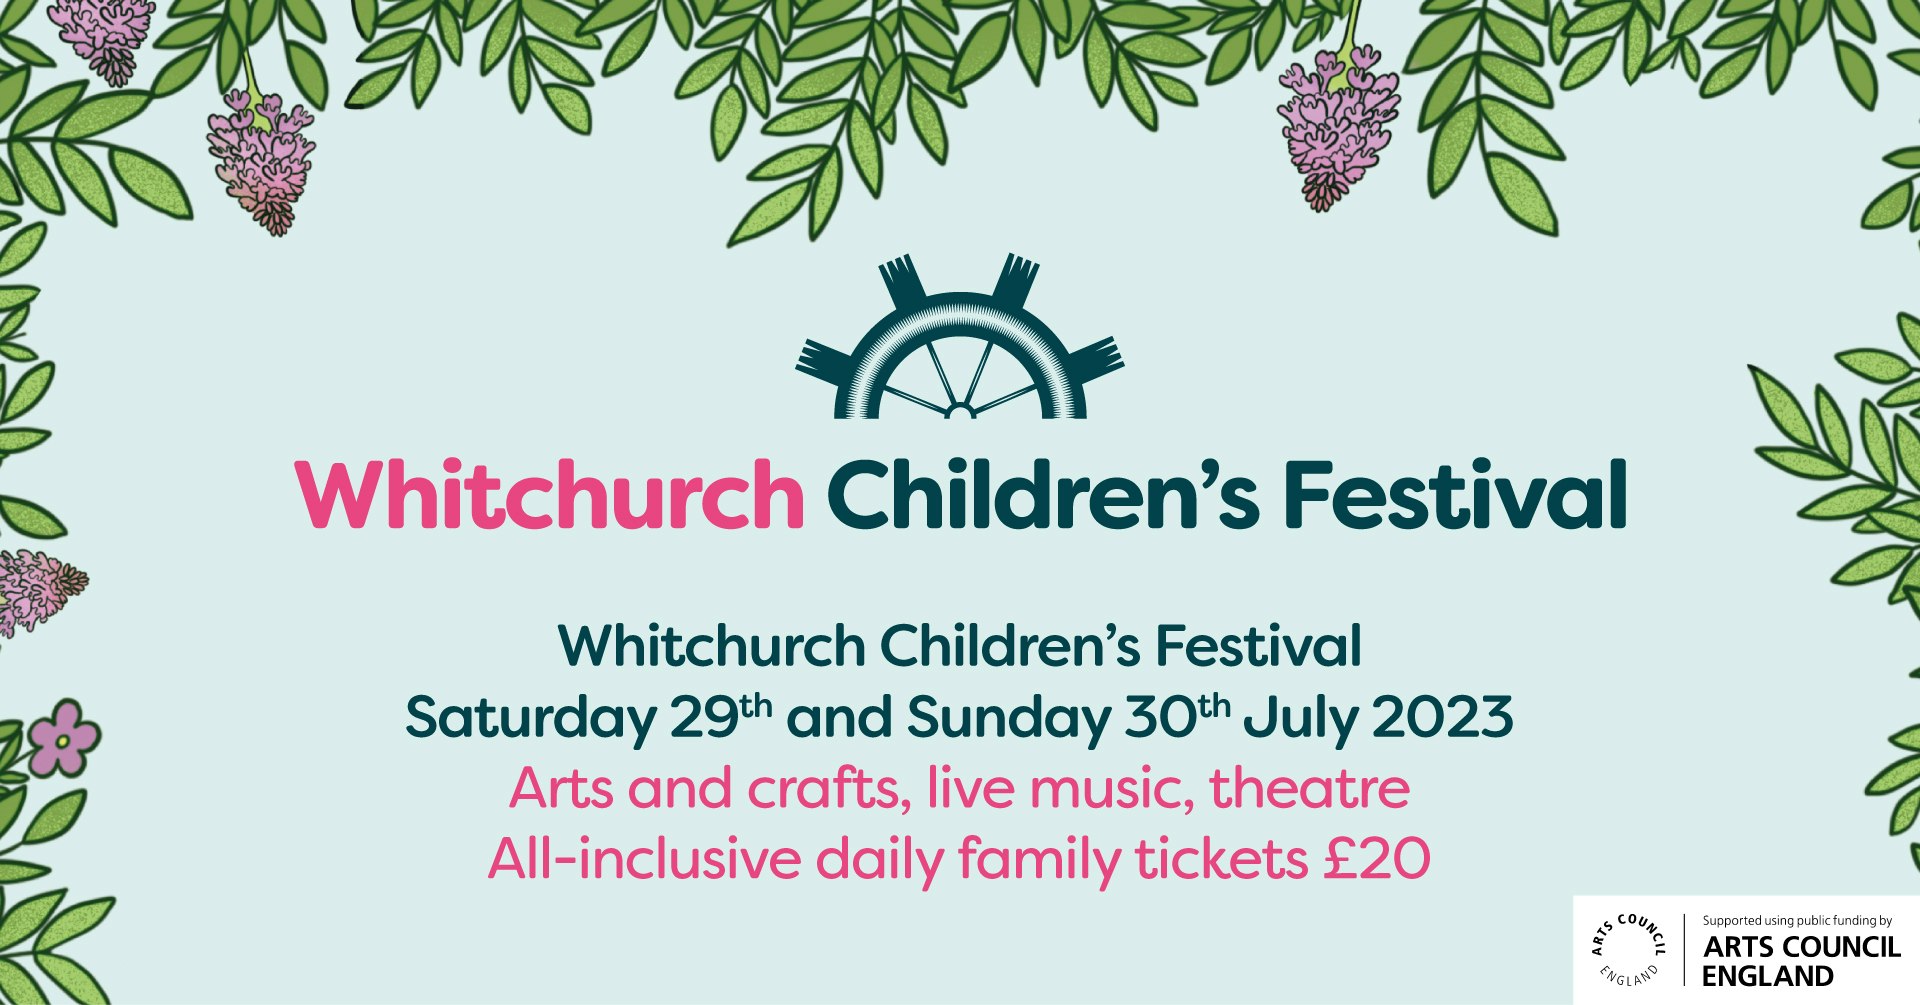 Whitchurch Children's Festival. Sat 29 and Sun 30 July